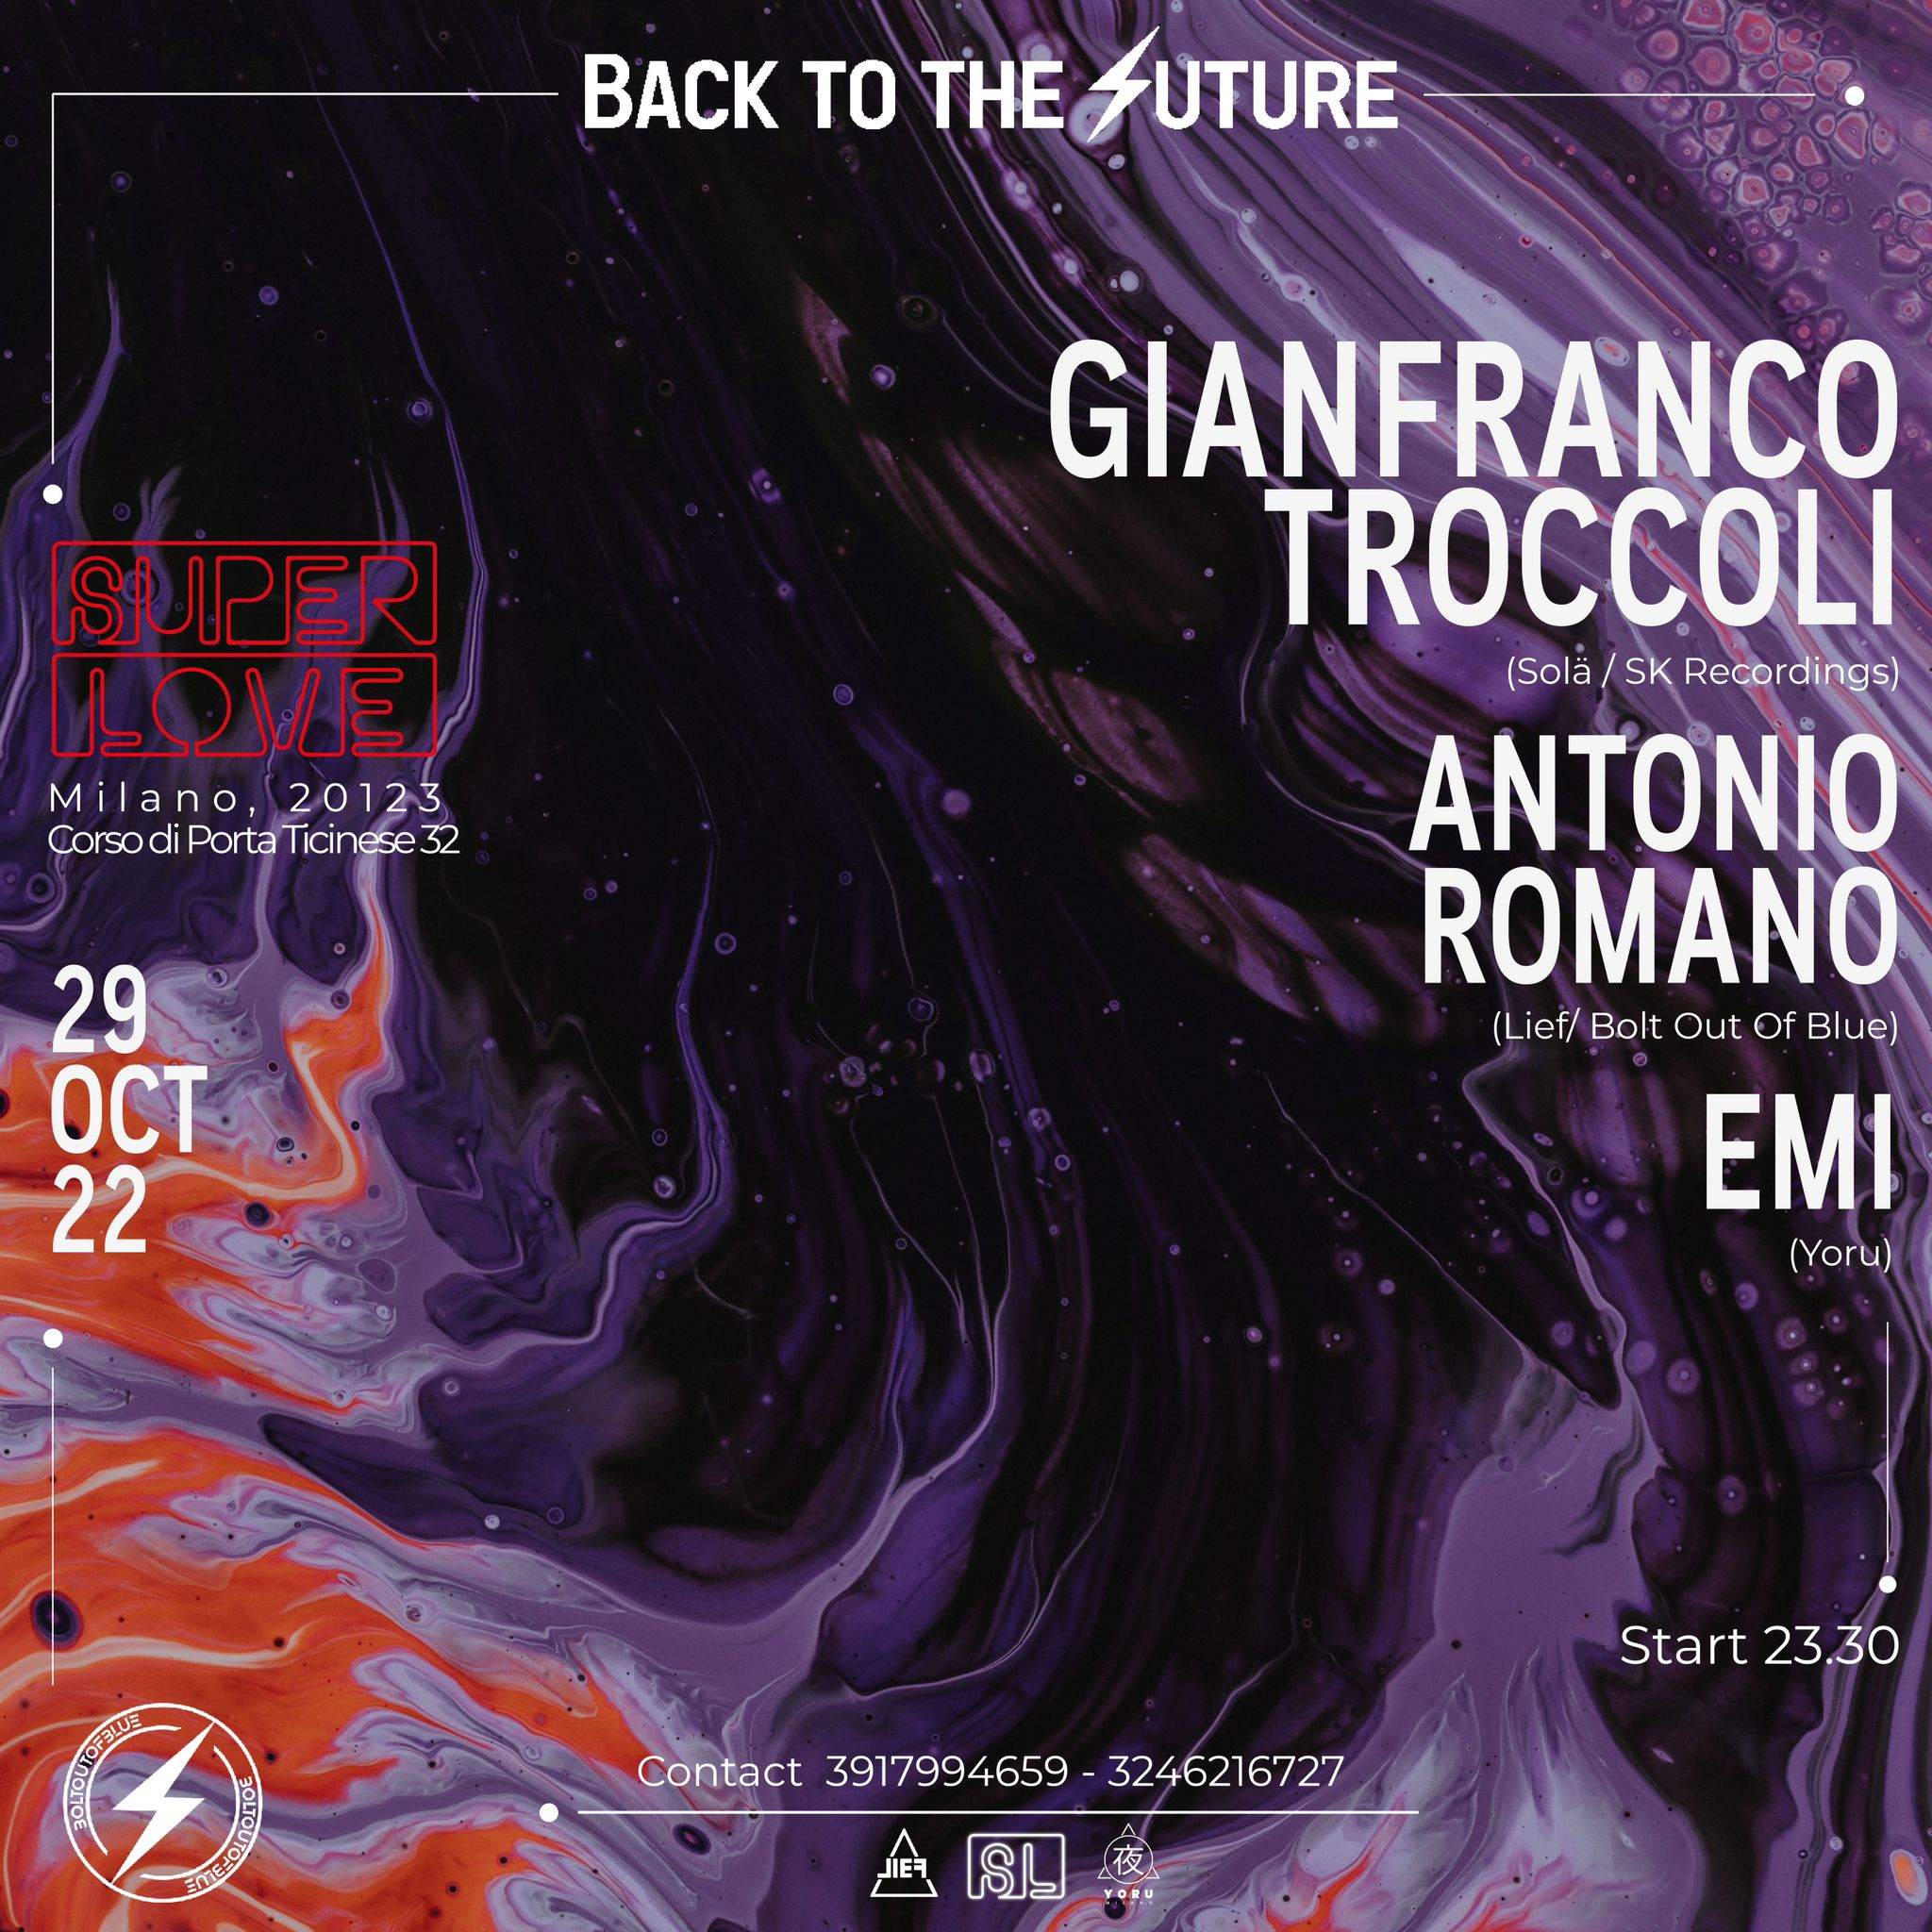 BoltOutOfBlue presents Back To The Future with Gianfranco Troccoli - フライヤー表